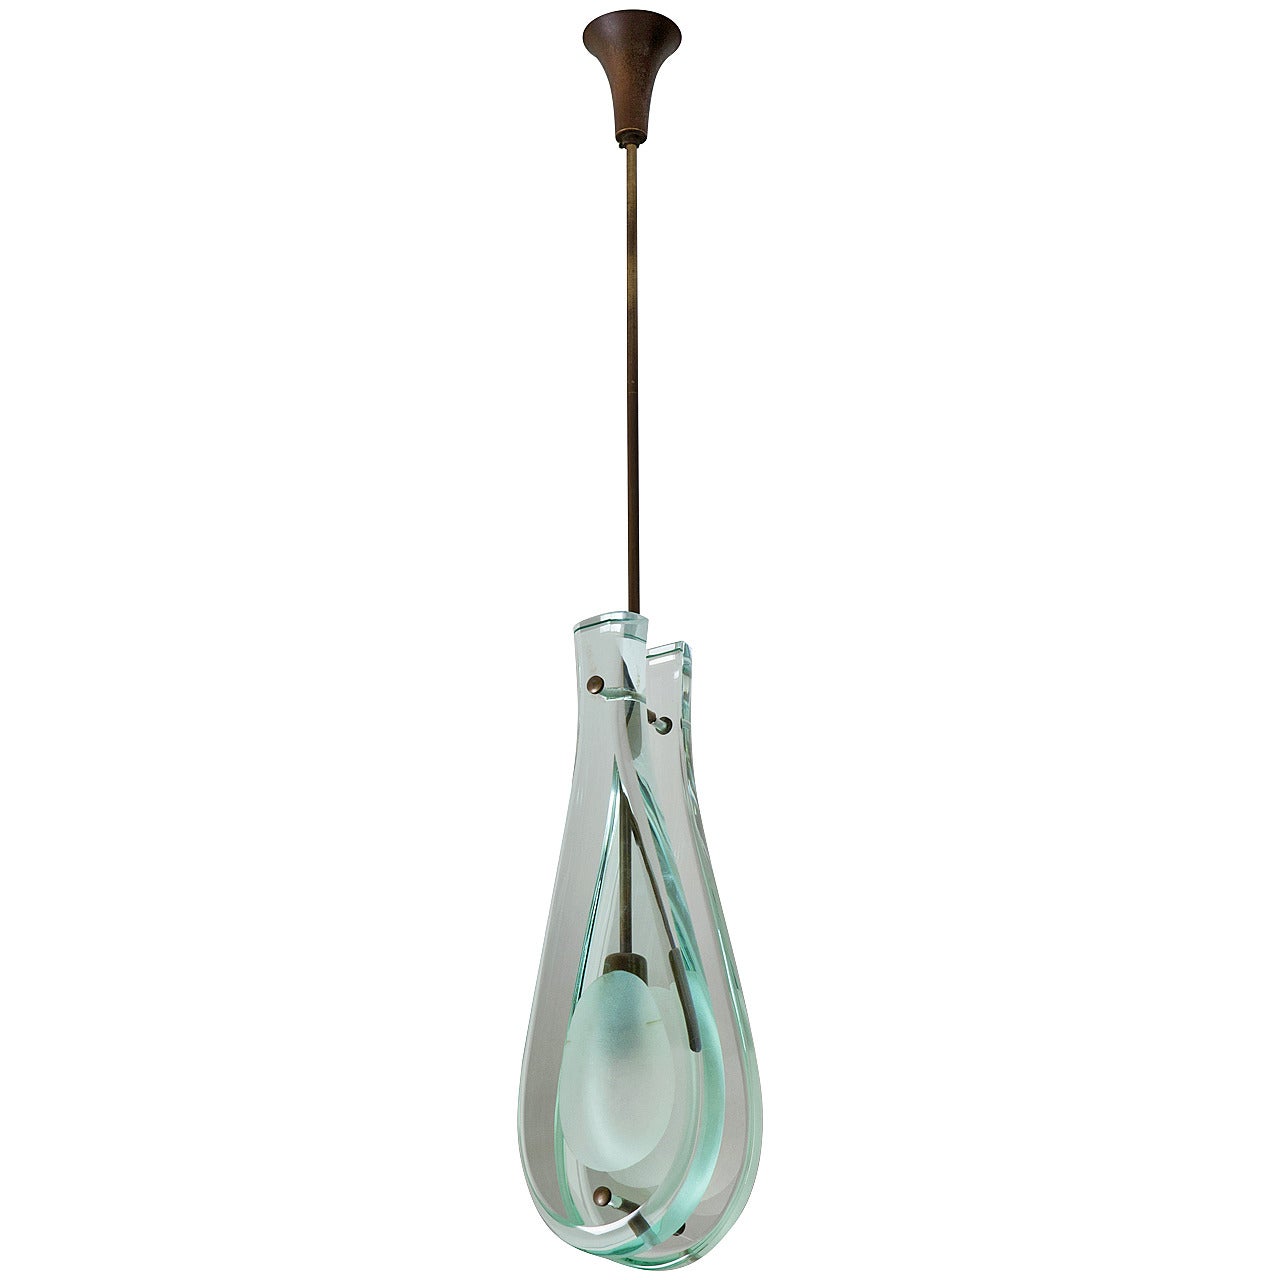 Max Ingrand, 2258 Hanging Lamp, Manufactured by Fontana Arte, Italy